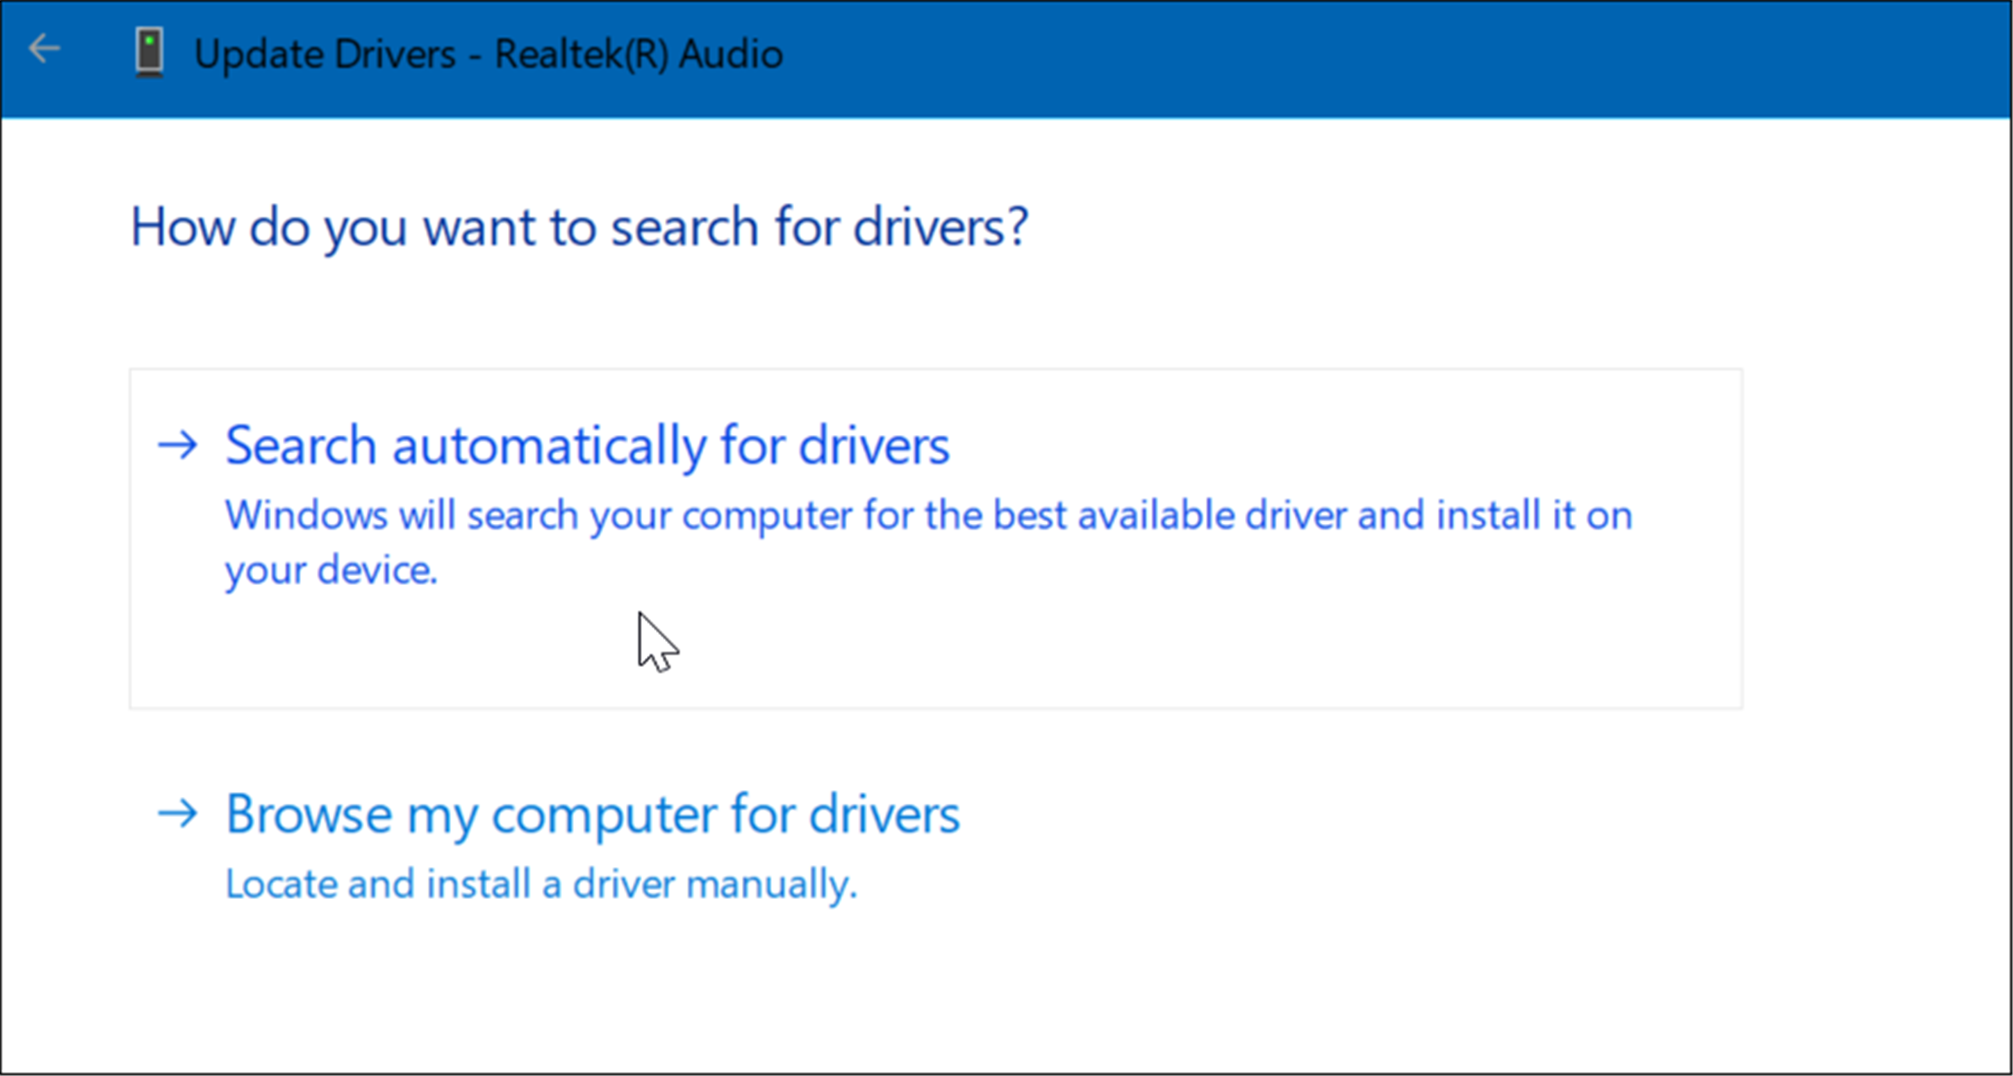 11-search-automatically-for-drivers